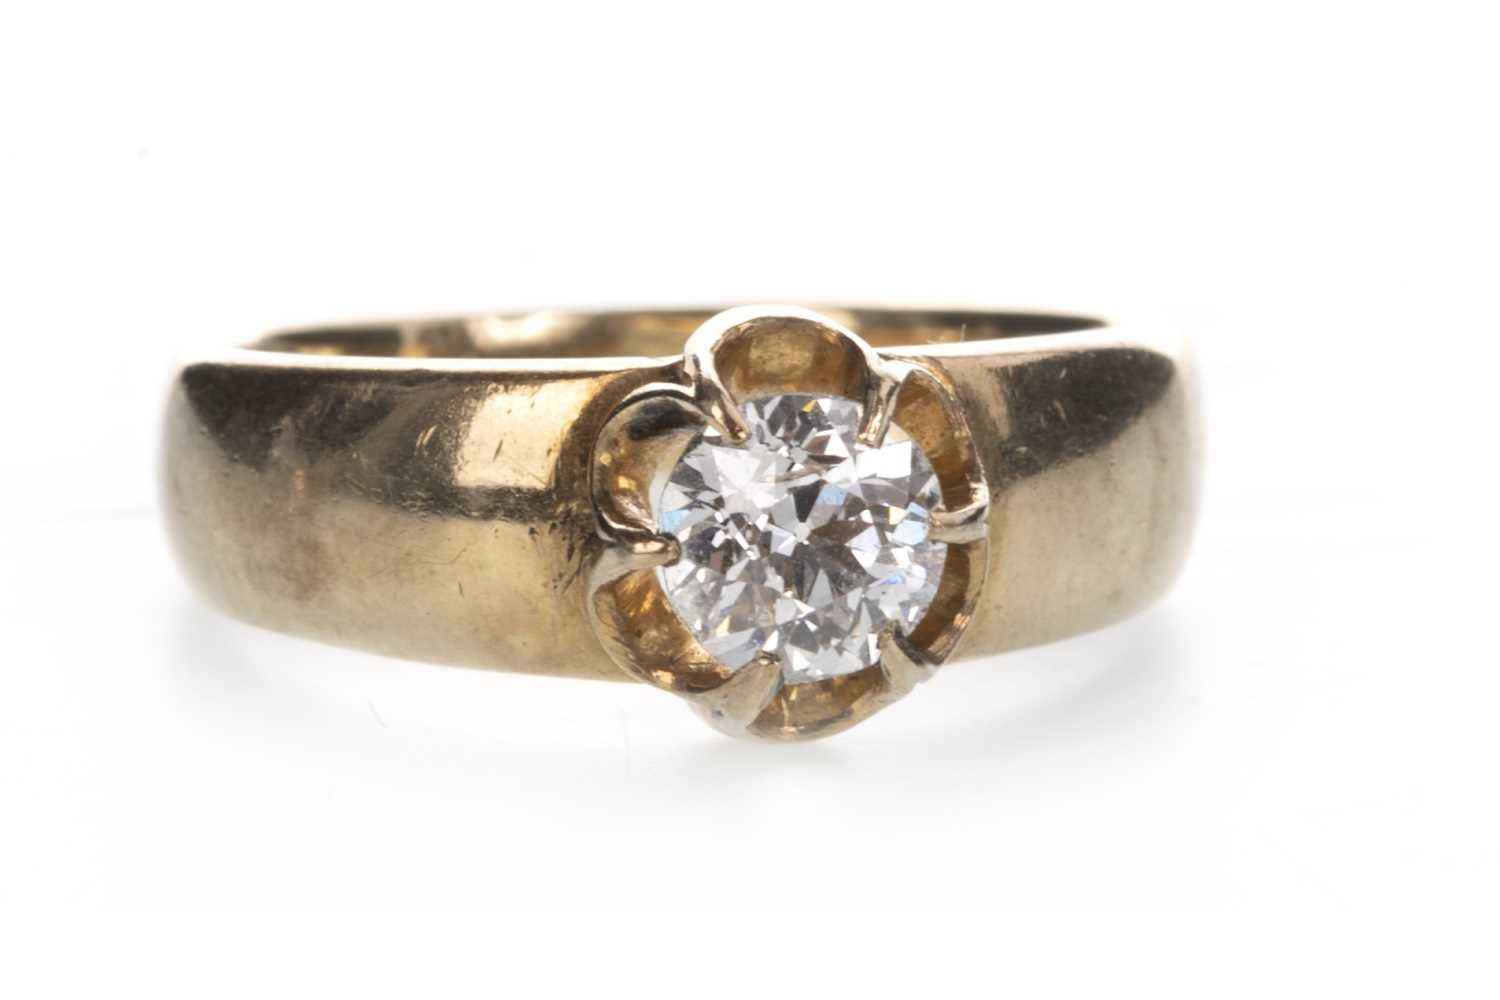 Lot 802 - A DIAMOND SOLITAIRE RING